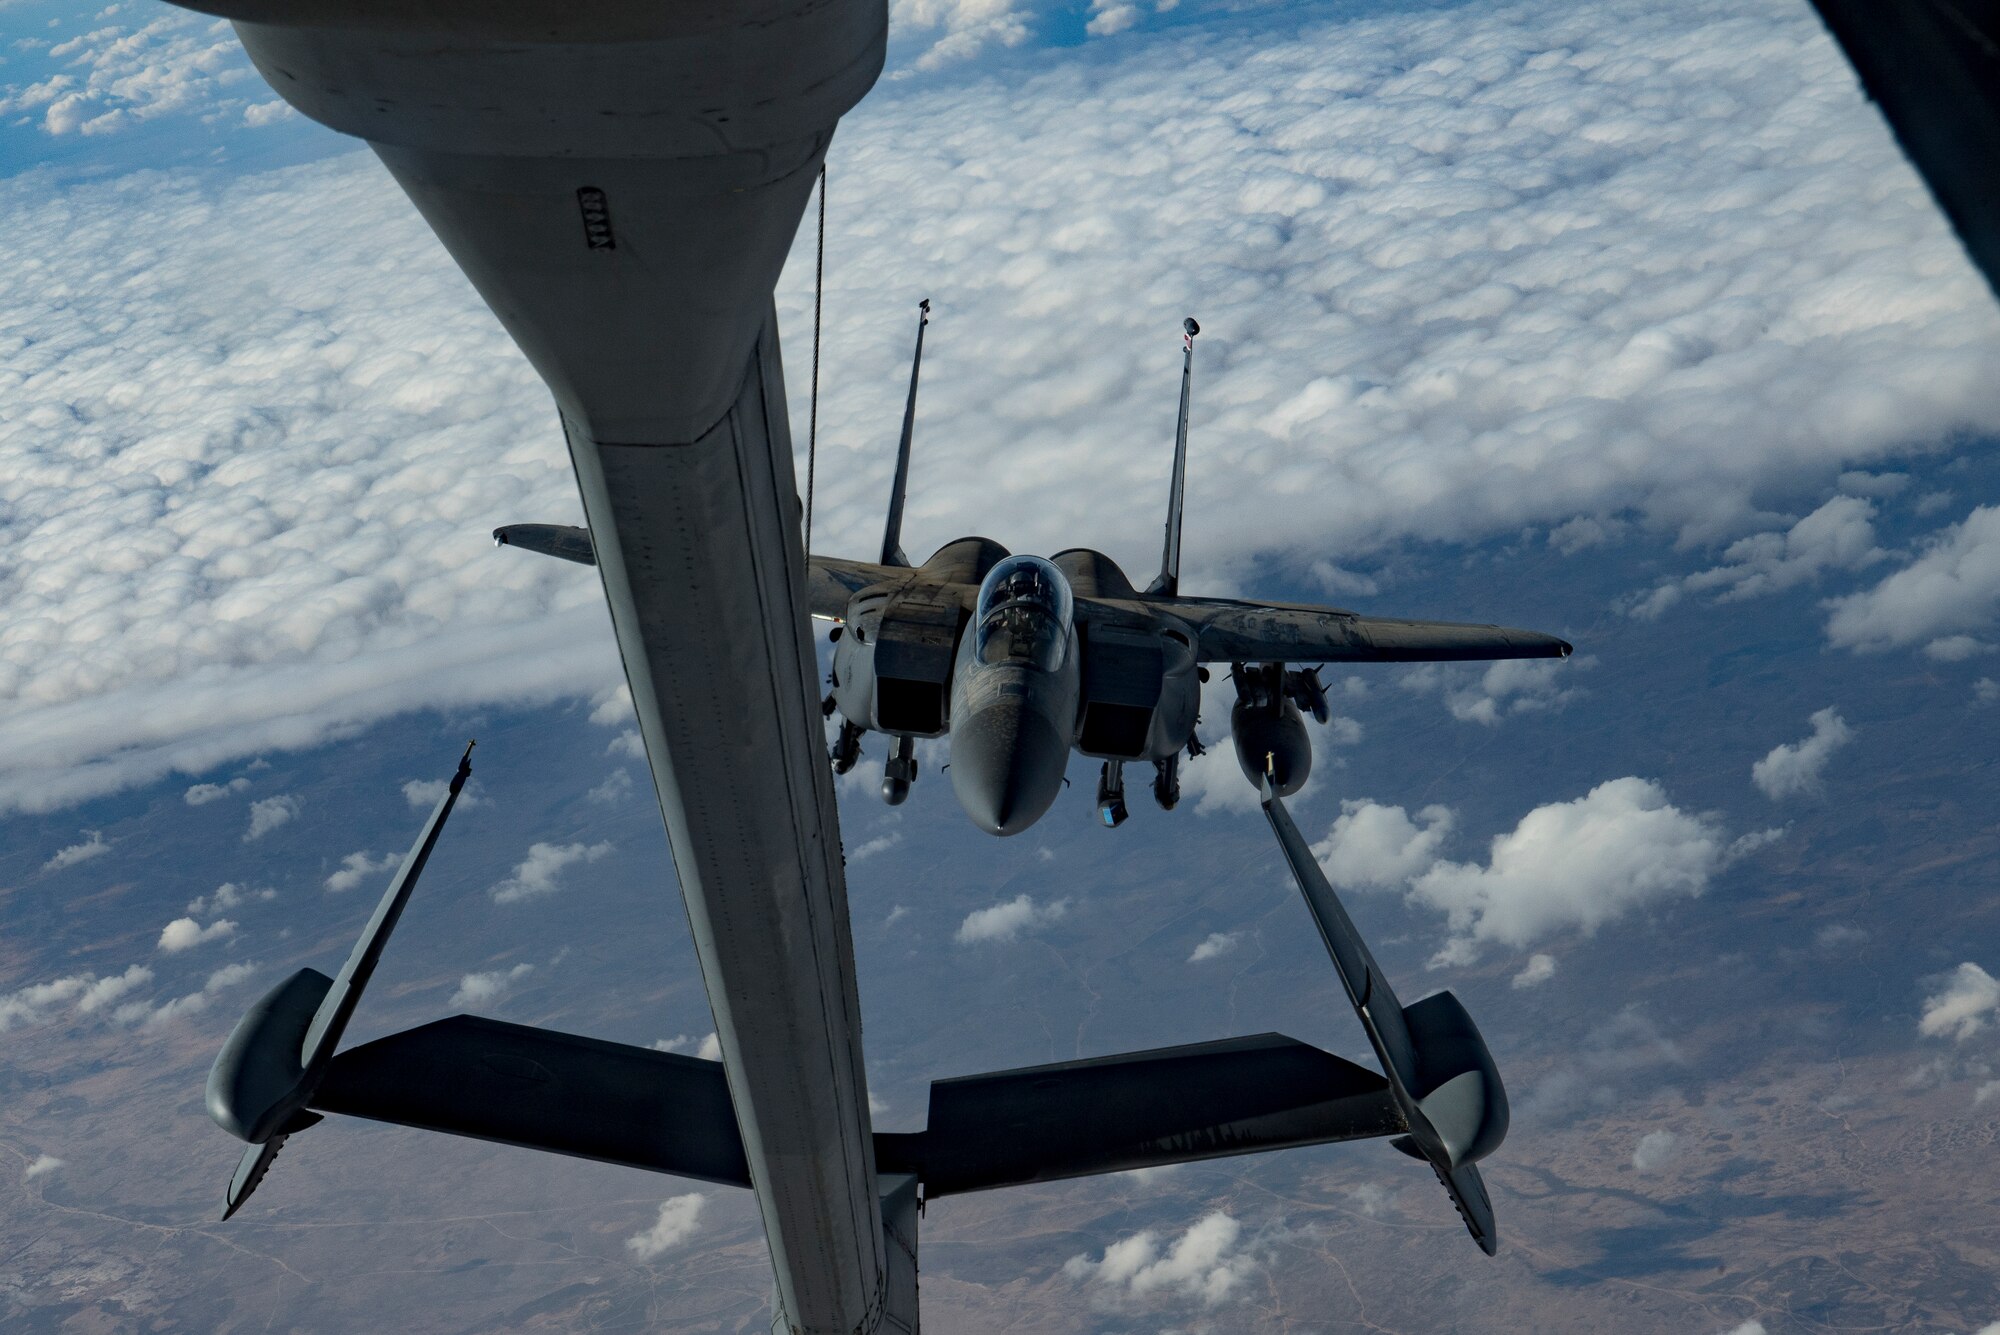 A U.S. Air Force F-15E Strike Eagle assigned to the 494th Expeditionary Fighter Squadron approaches a KC-10 Extender assigned to the 908th Expeditionary Air Refueling Squadron above the U.S. Central Command area of responsibility, Jan. 13, 2020.